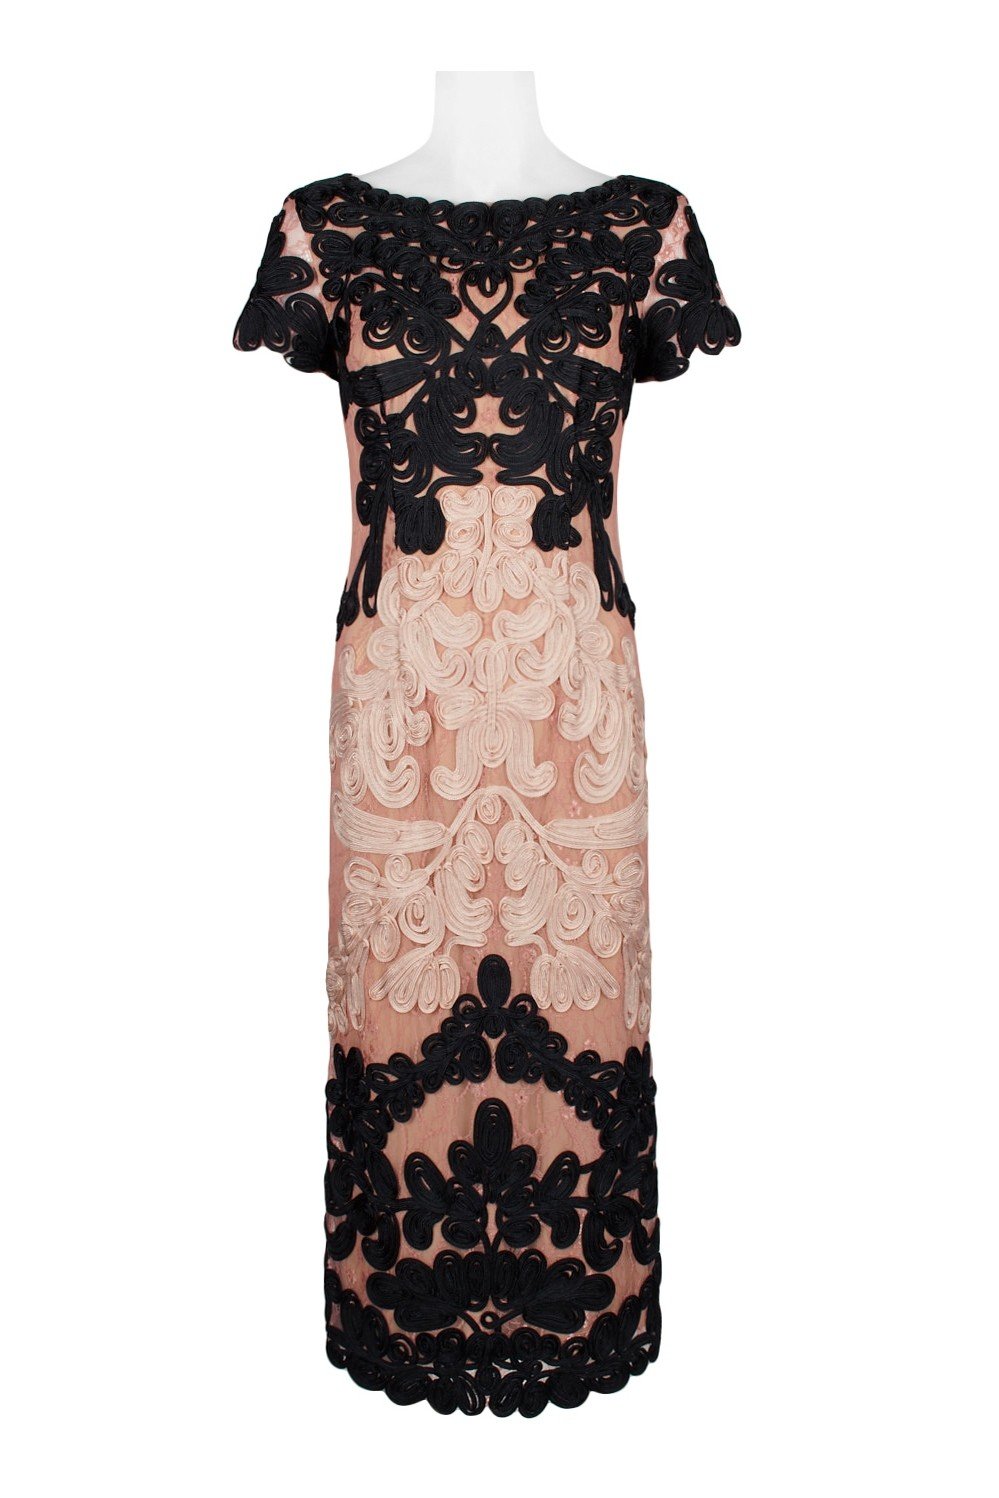 JS Collections - 865626 Short Sleeve Embroidered Soutache Lace Dress In Black and Pink